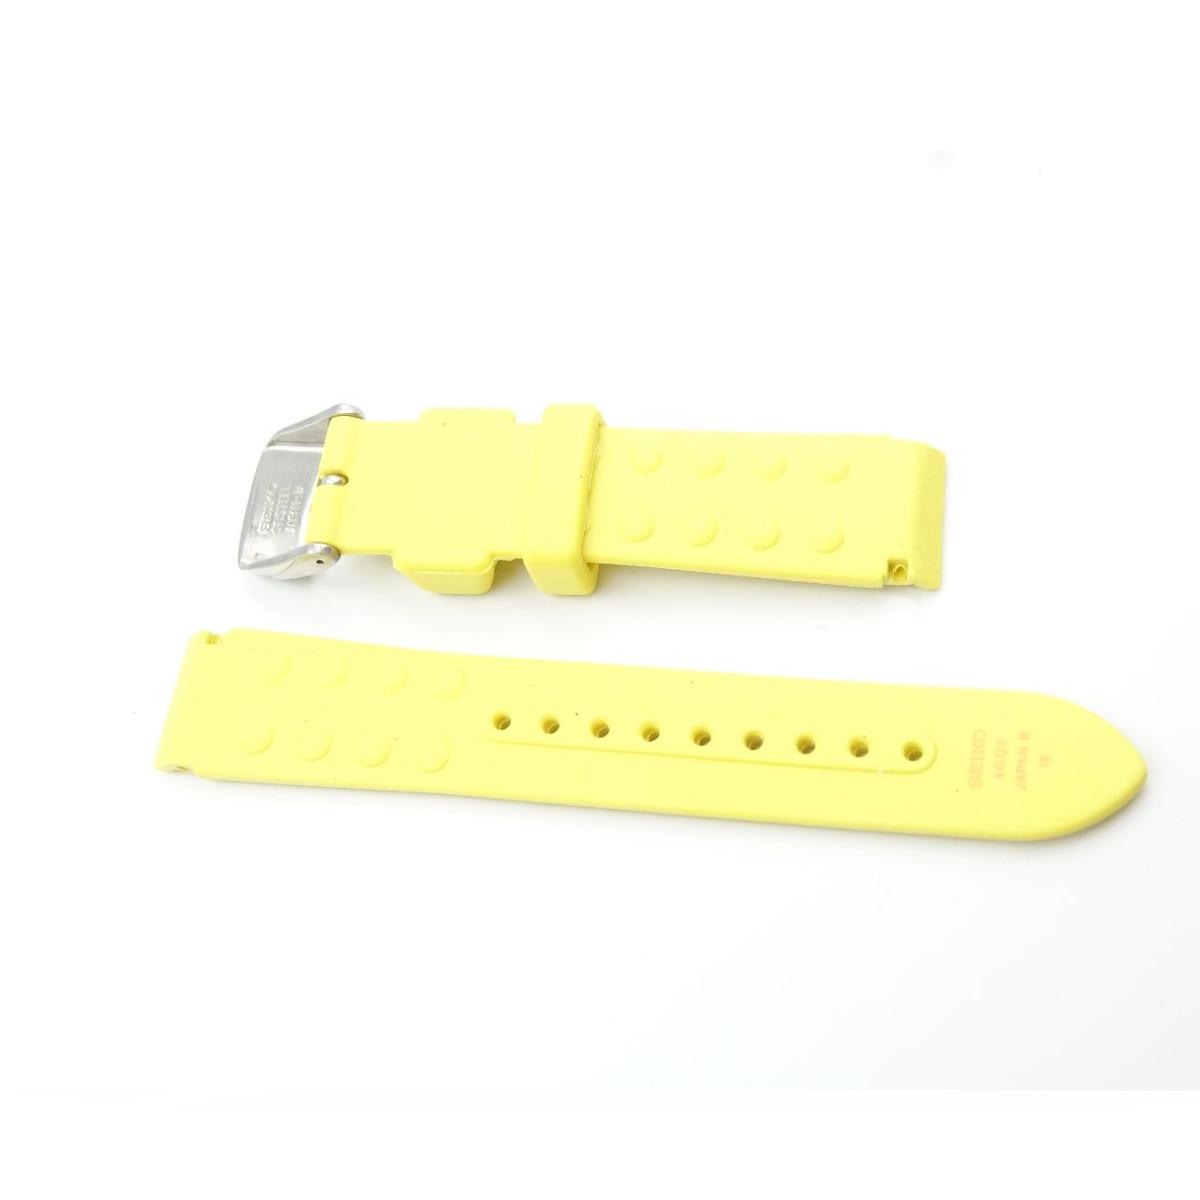 SEIKO KINETIC ARCTURA WATCH BAND RUBBER YELLOW 18M 4GD3